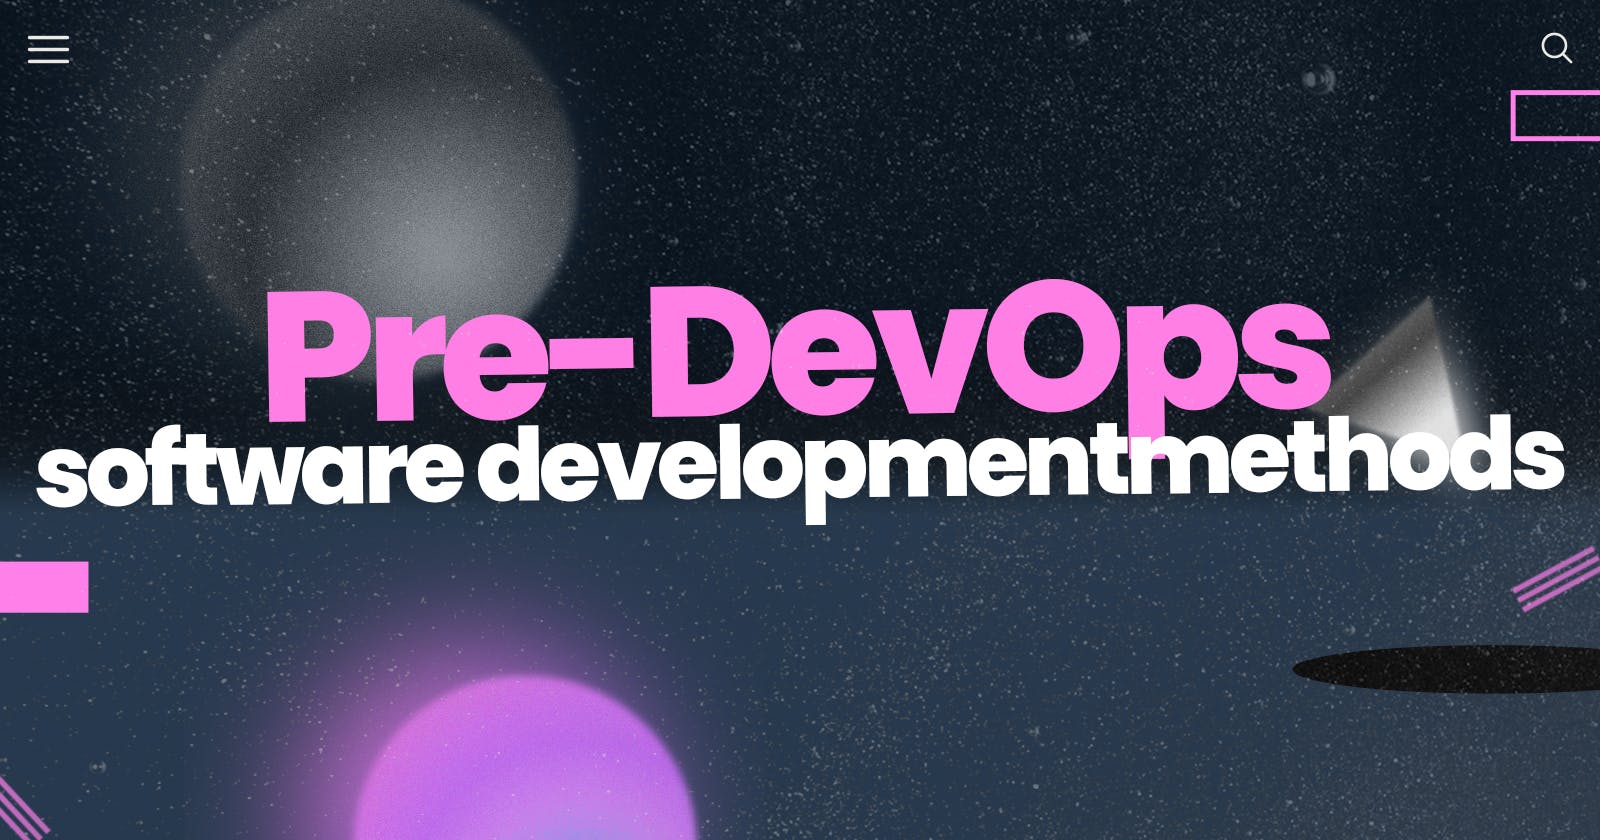 What methods were used for software development prior to DevOps?